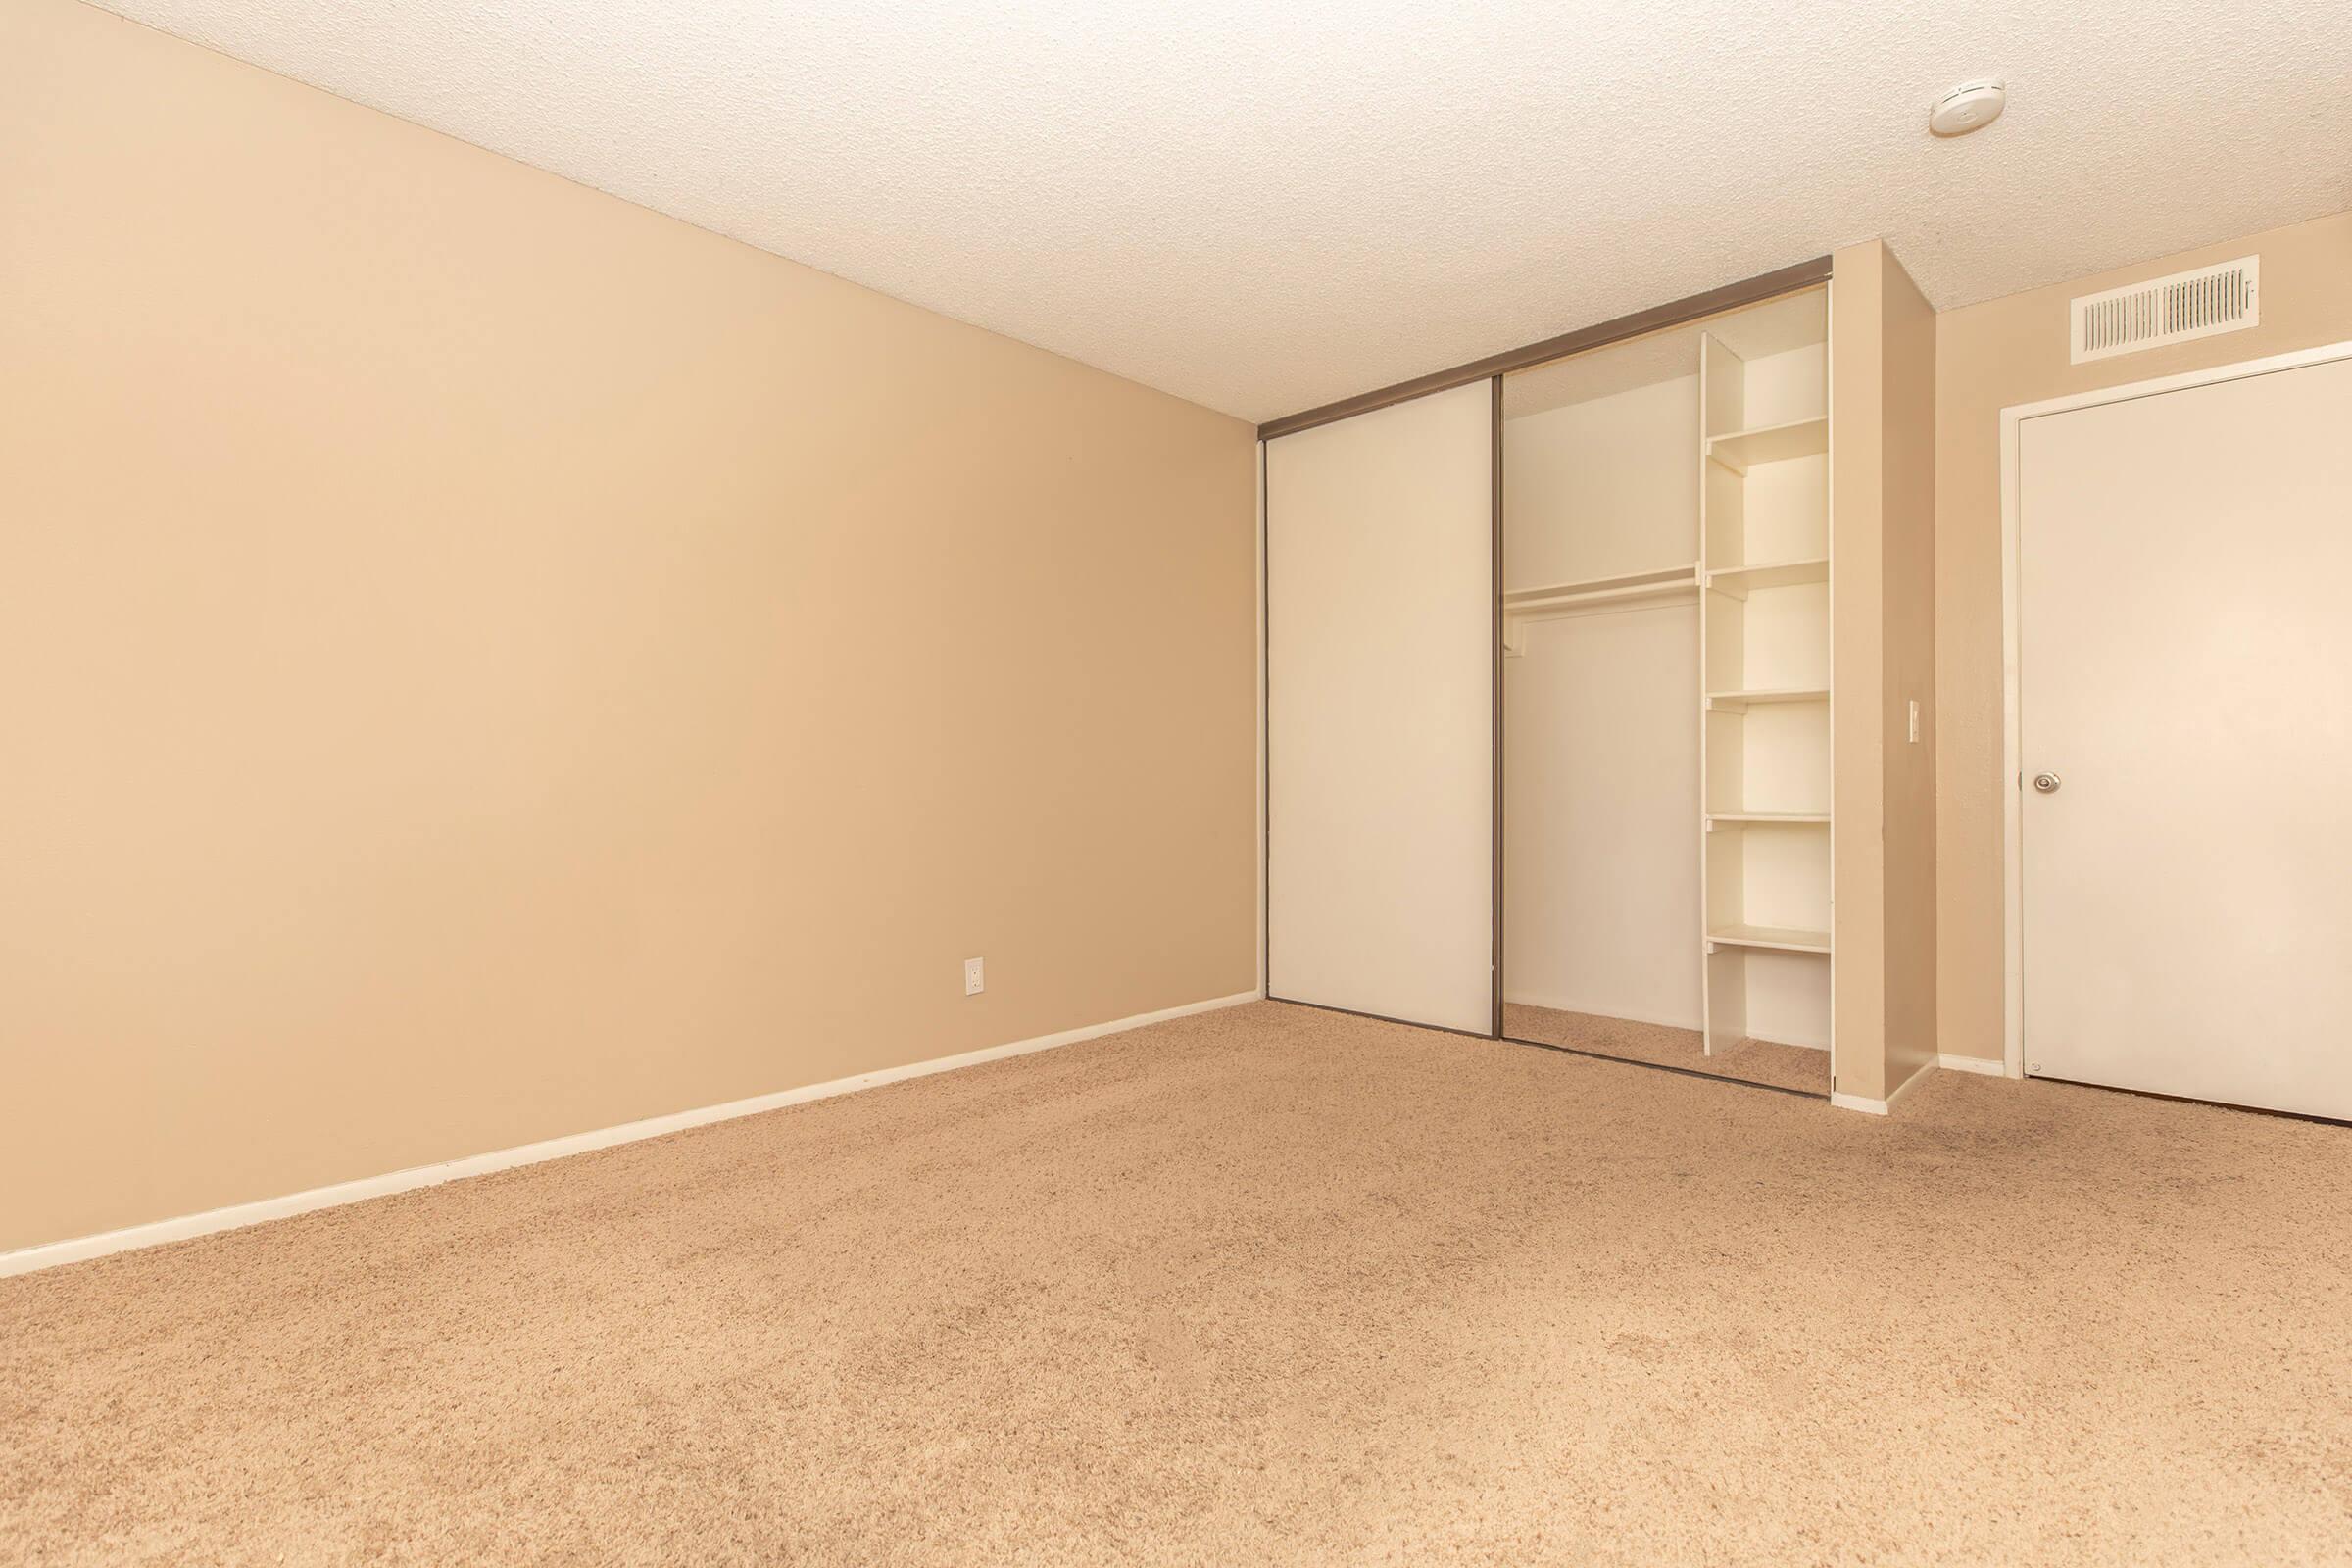 carpeted bedroom with open closet with shelves